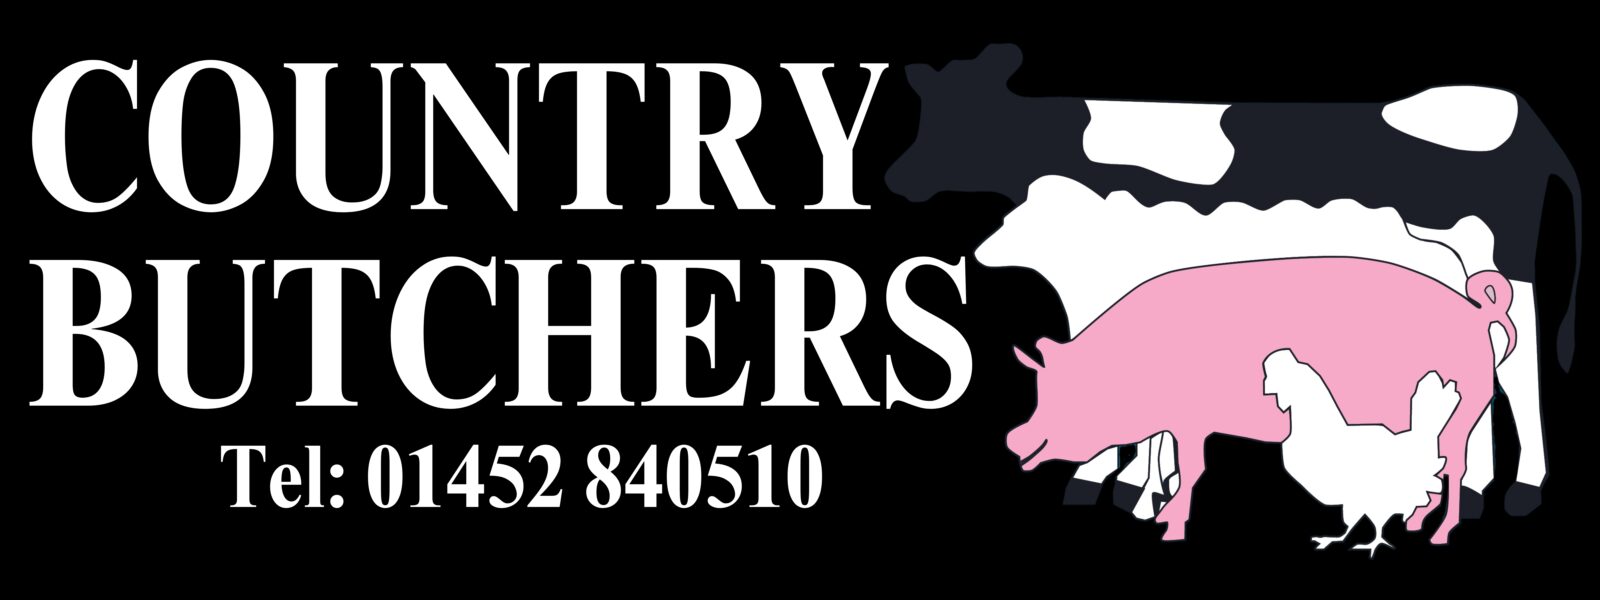 logo of country butchers, a catering butcv